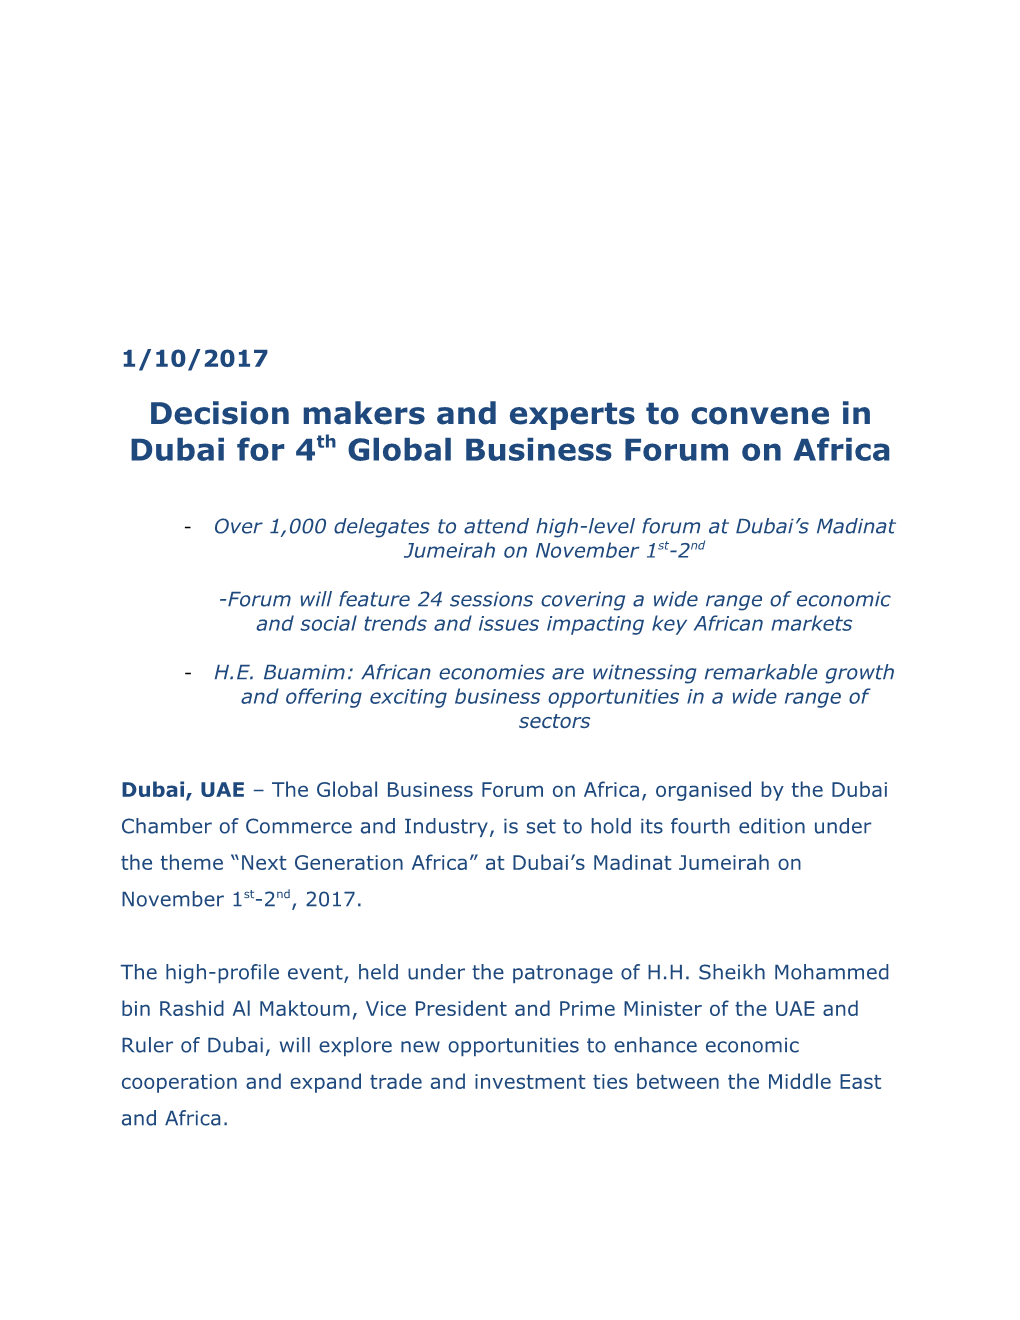 Decision Makers and Experts to Convene in Dubai for 4Th Global Business Forum on Africa